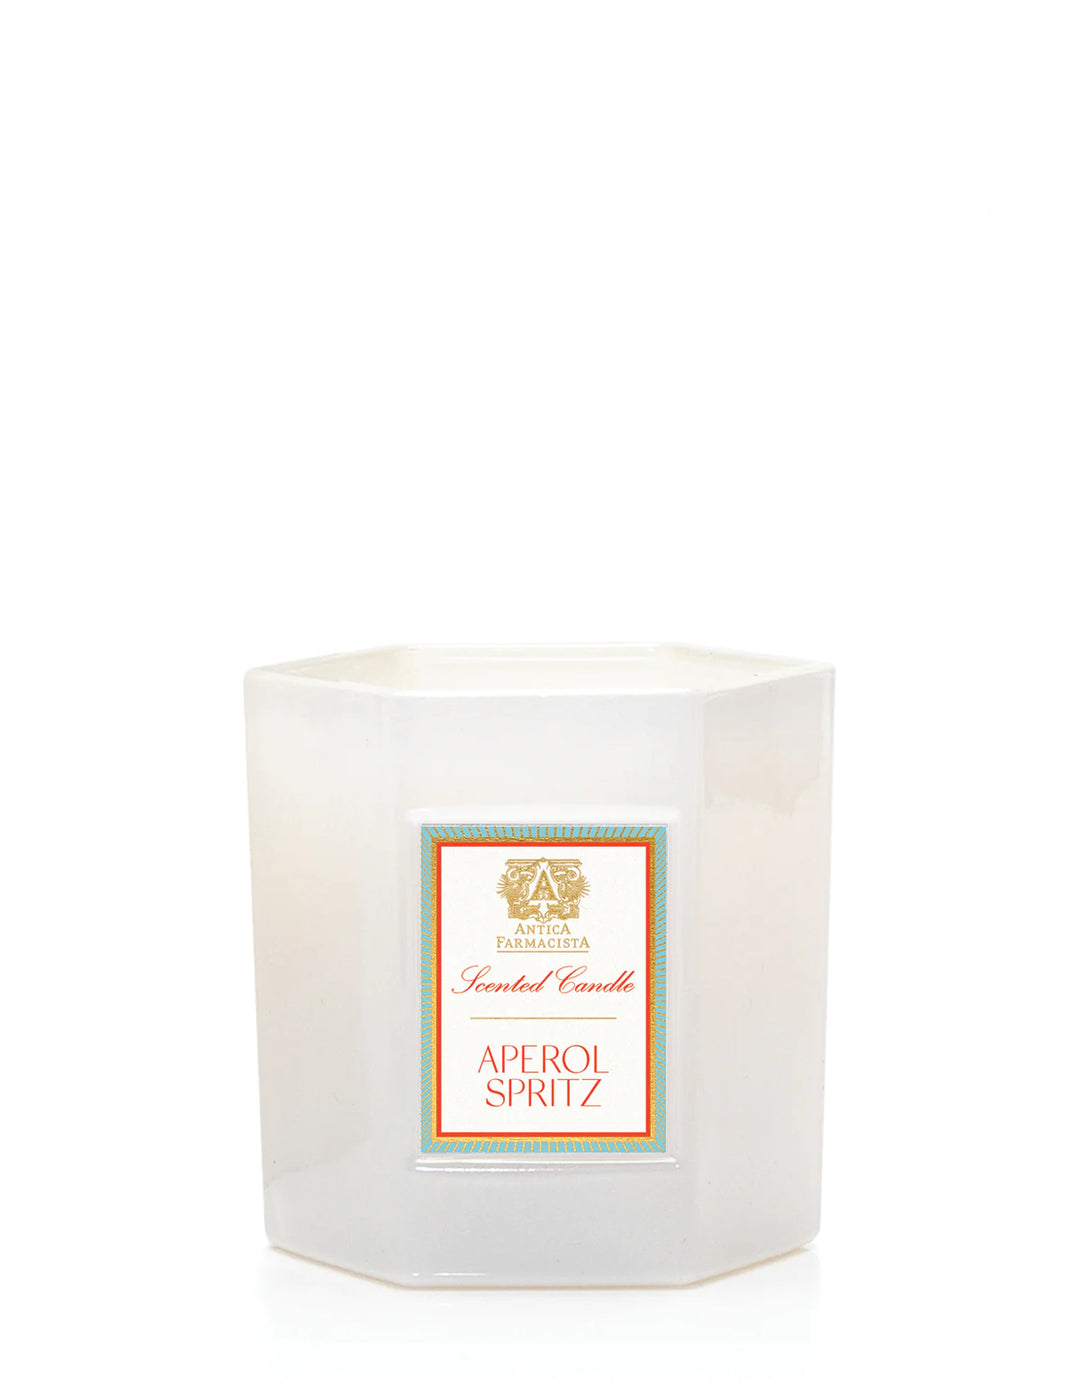 Aperol Spritz Scented Candle